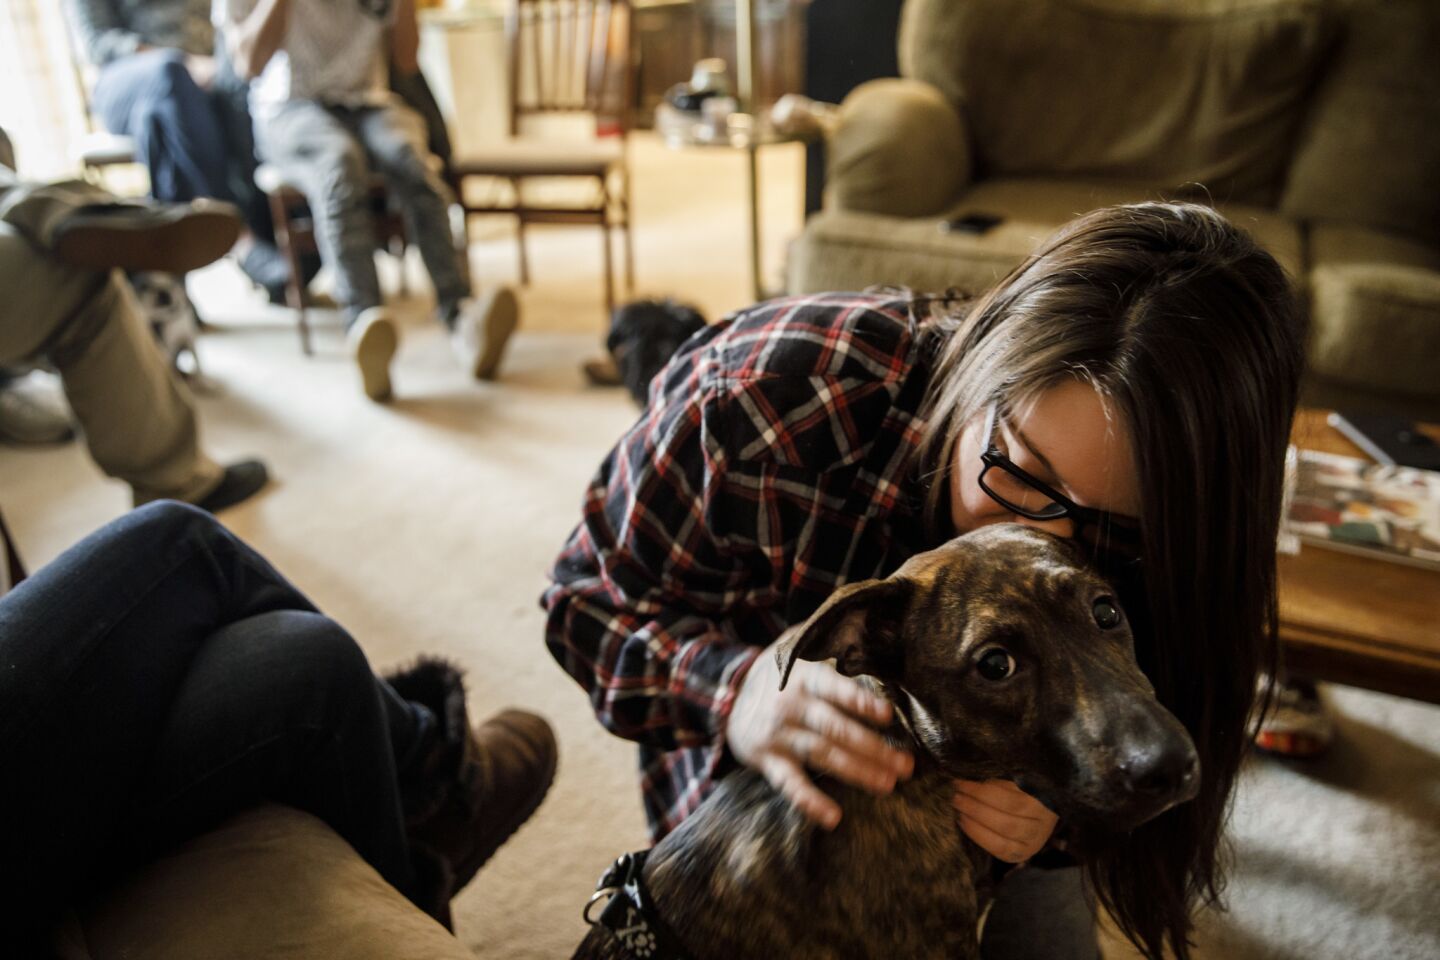 Alexandria Wilson, 21, kisses her dog Harley, after they both escaped the Camp Fire in Paradise, Calif.